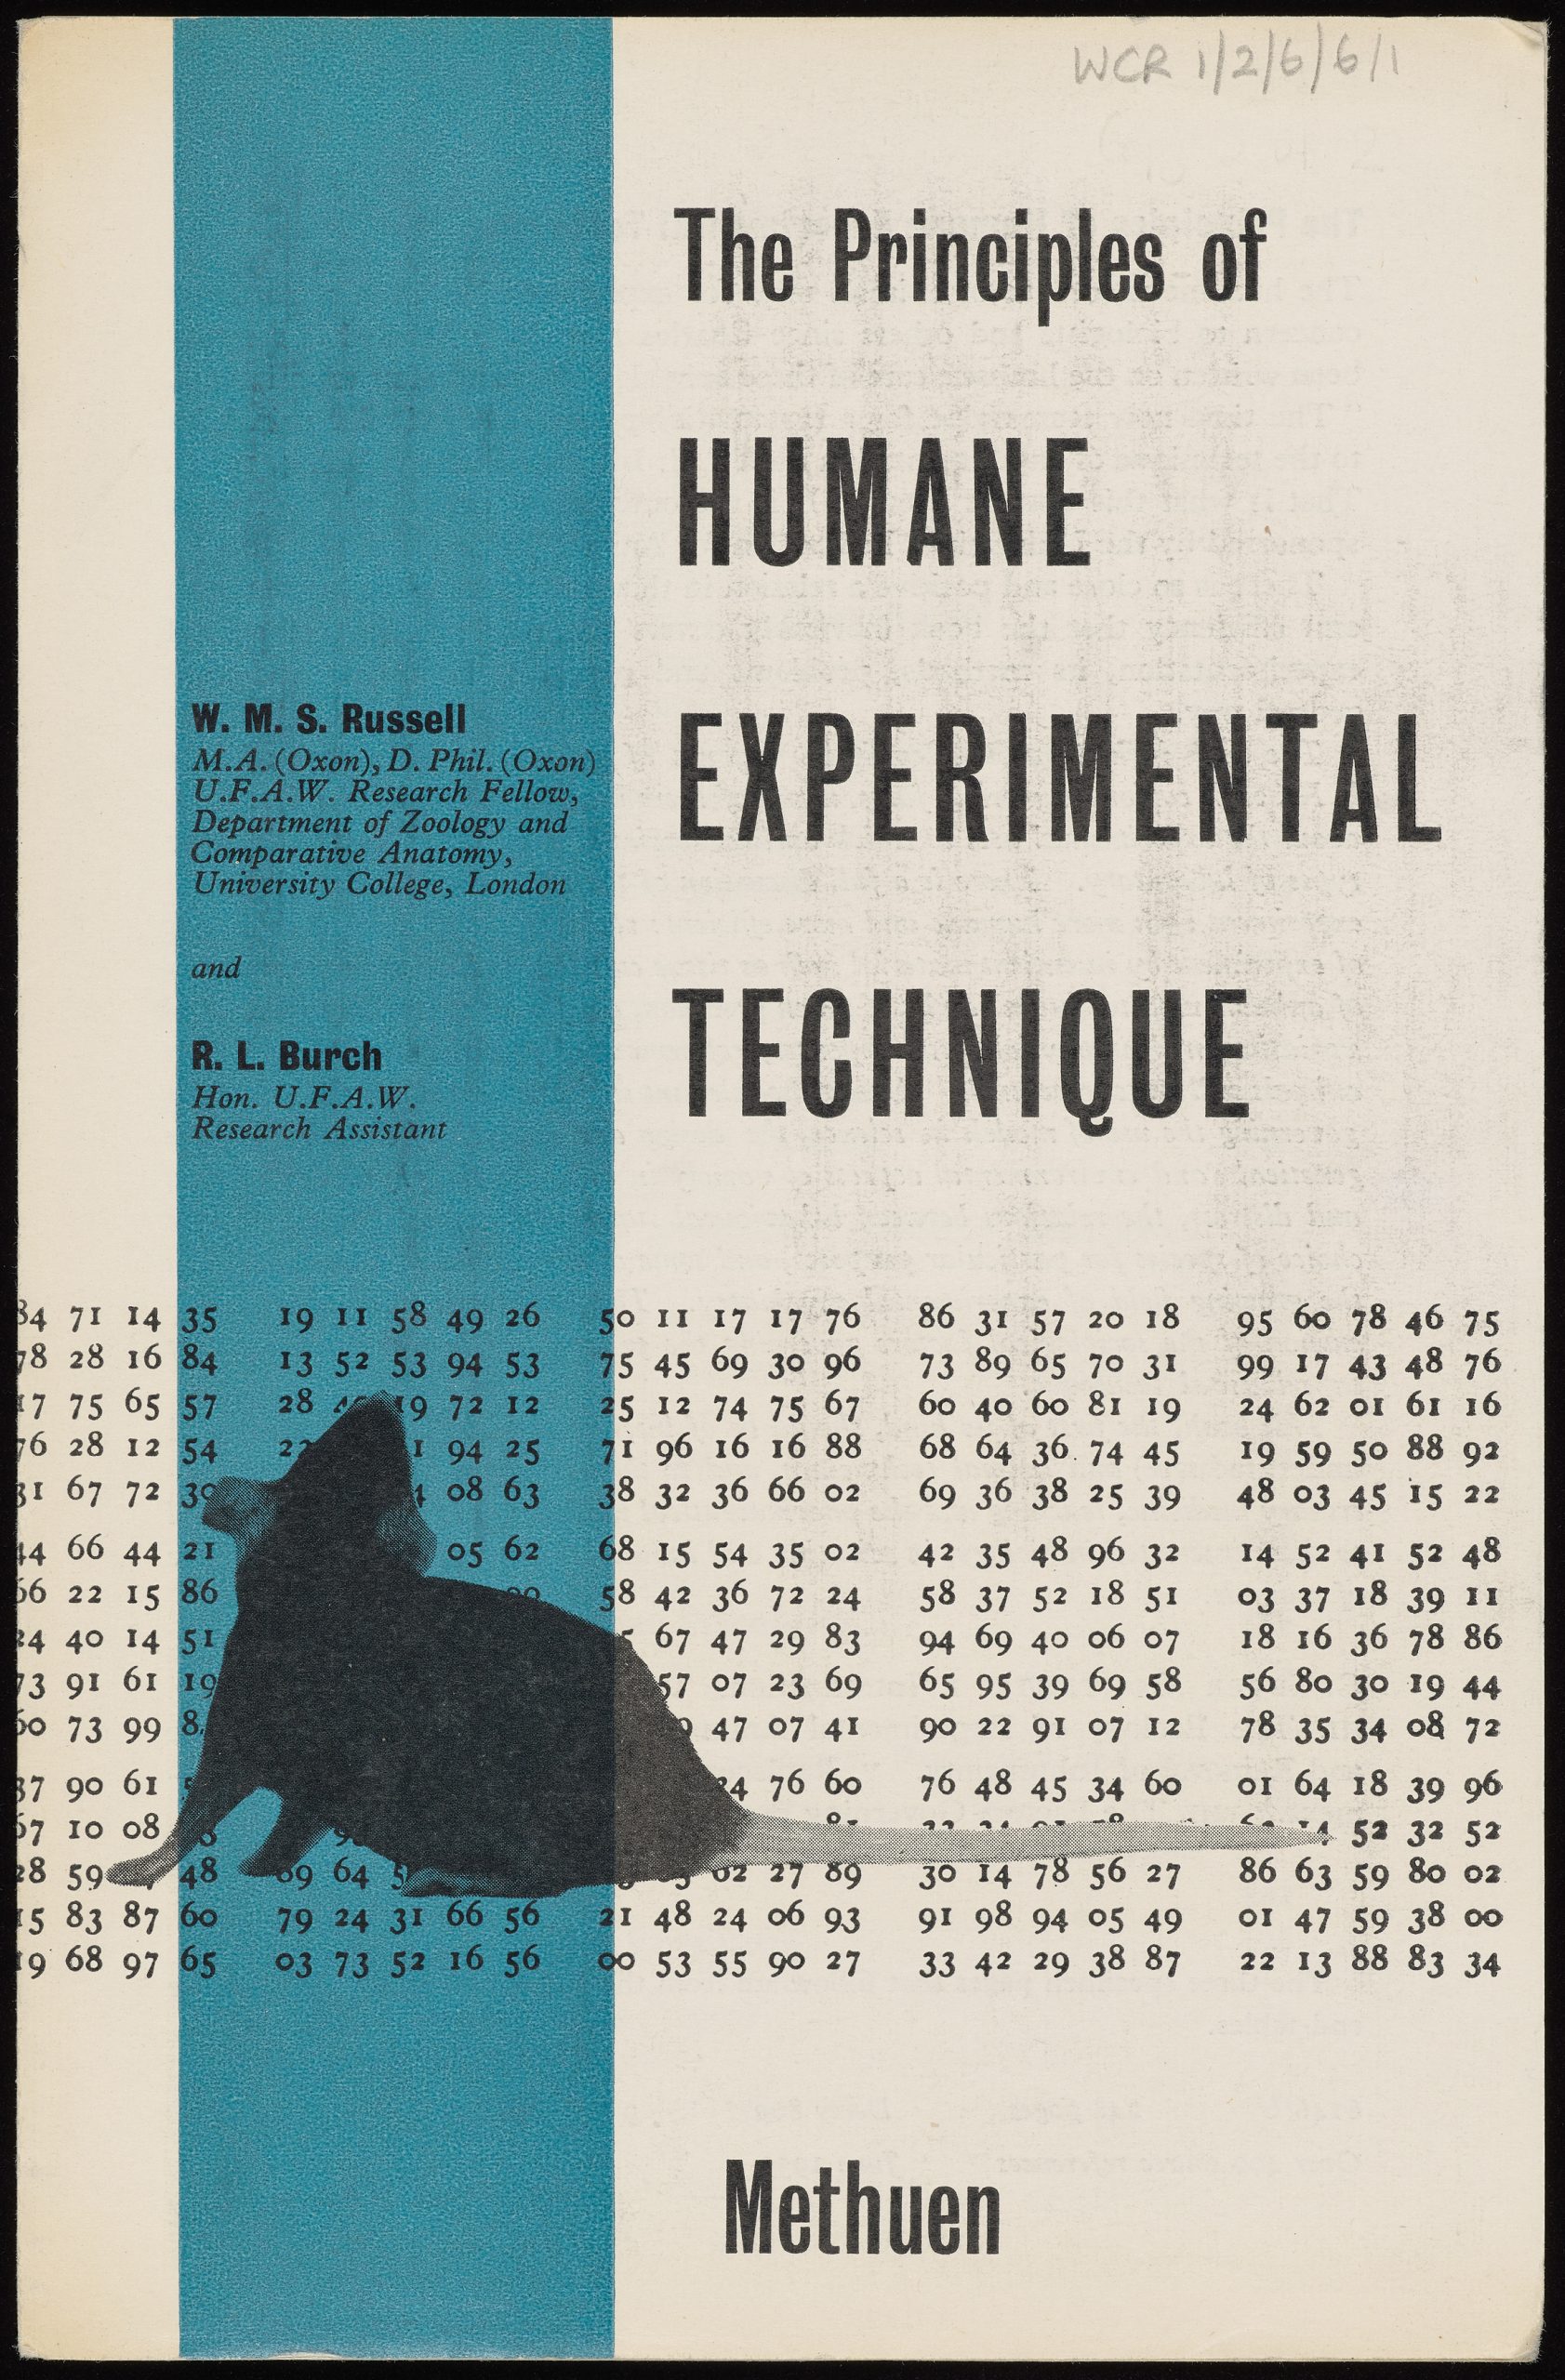 Promotional leaflet for ’The Principles’, 1959 showing a mouse in front of scientific data